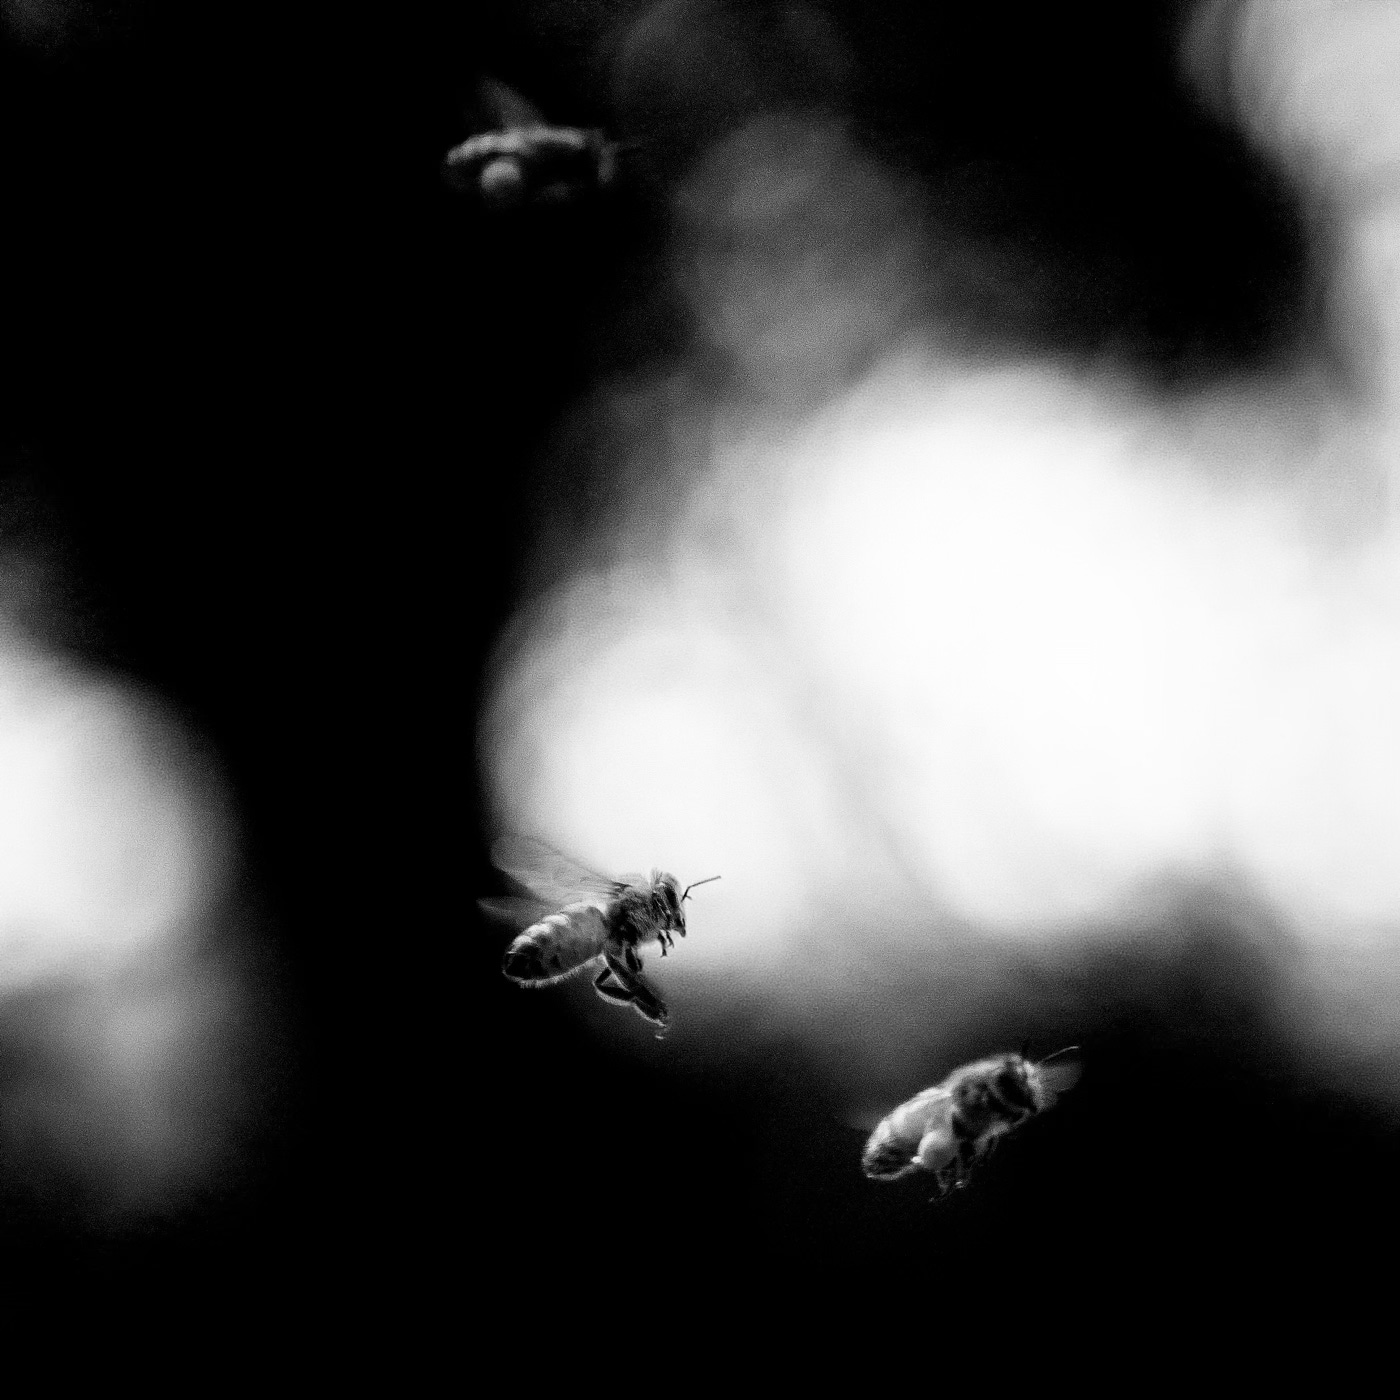 In a dance of shadows, honey bees hover in grayscale, delicate wings etched against the soft blur of light.